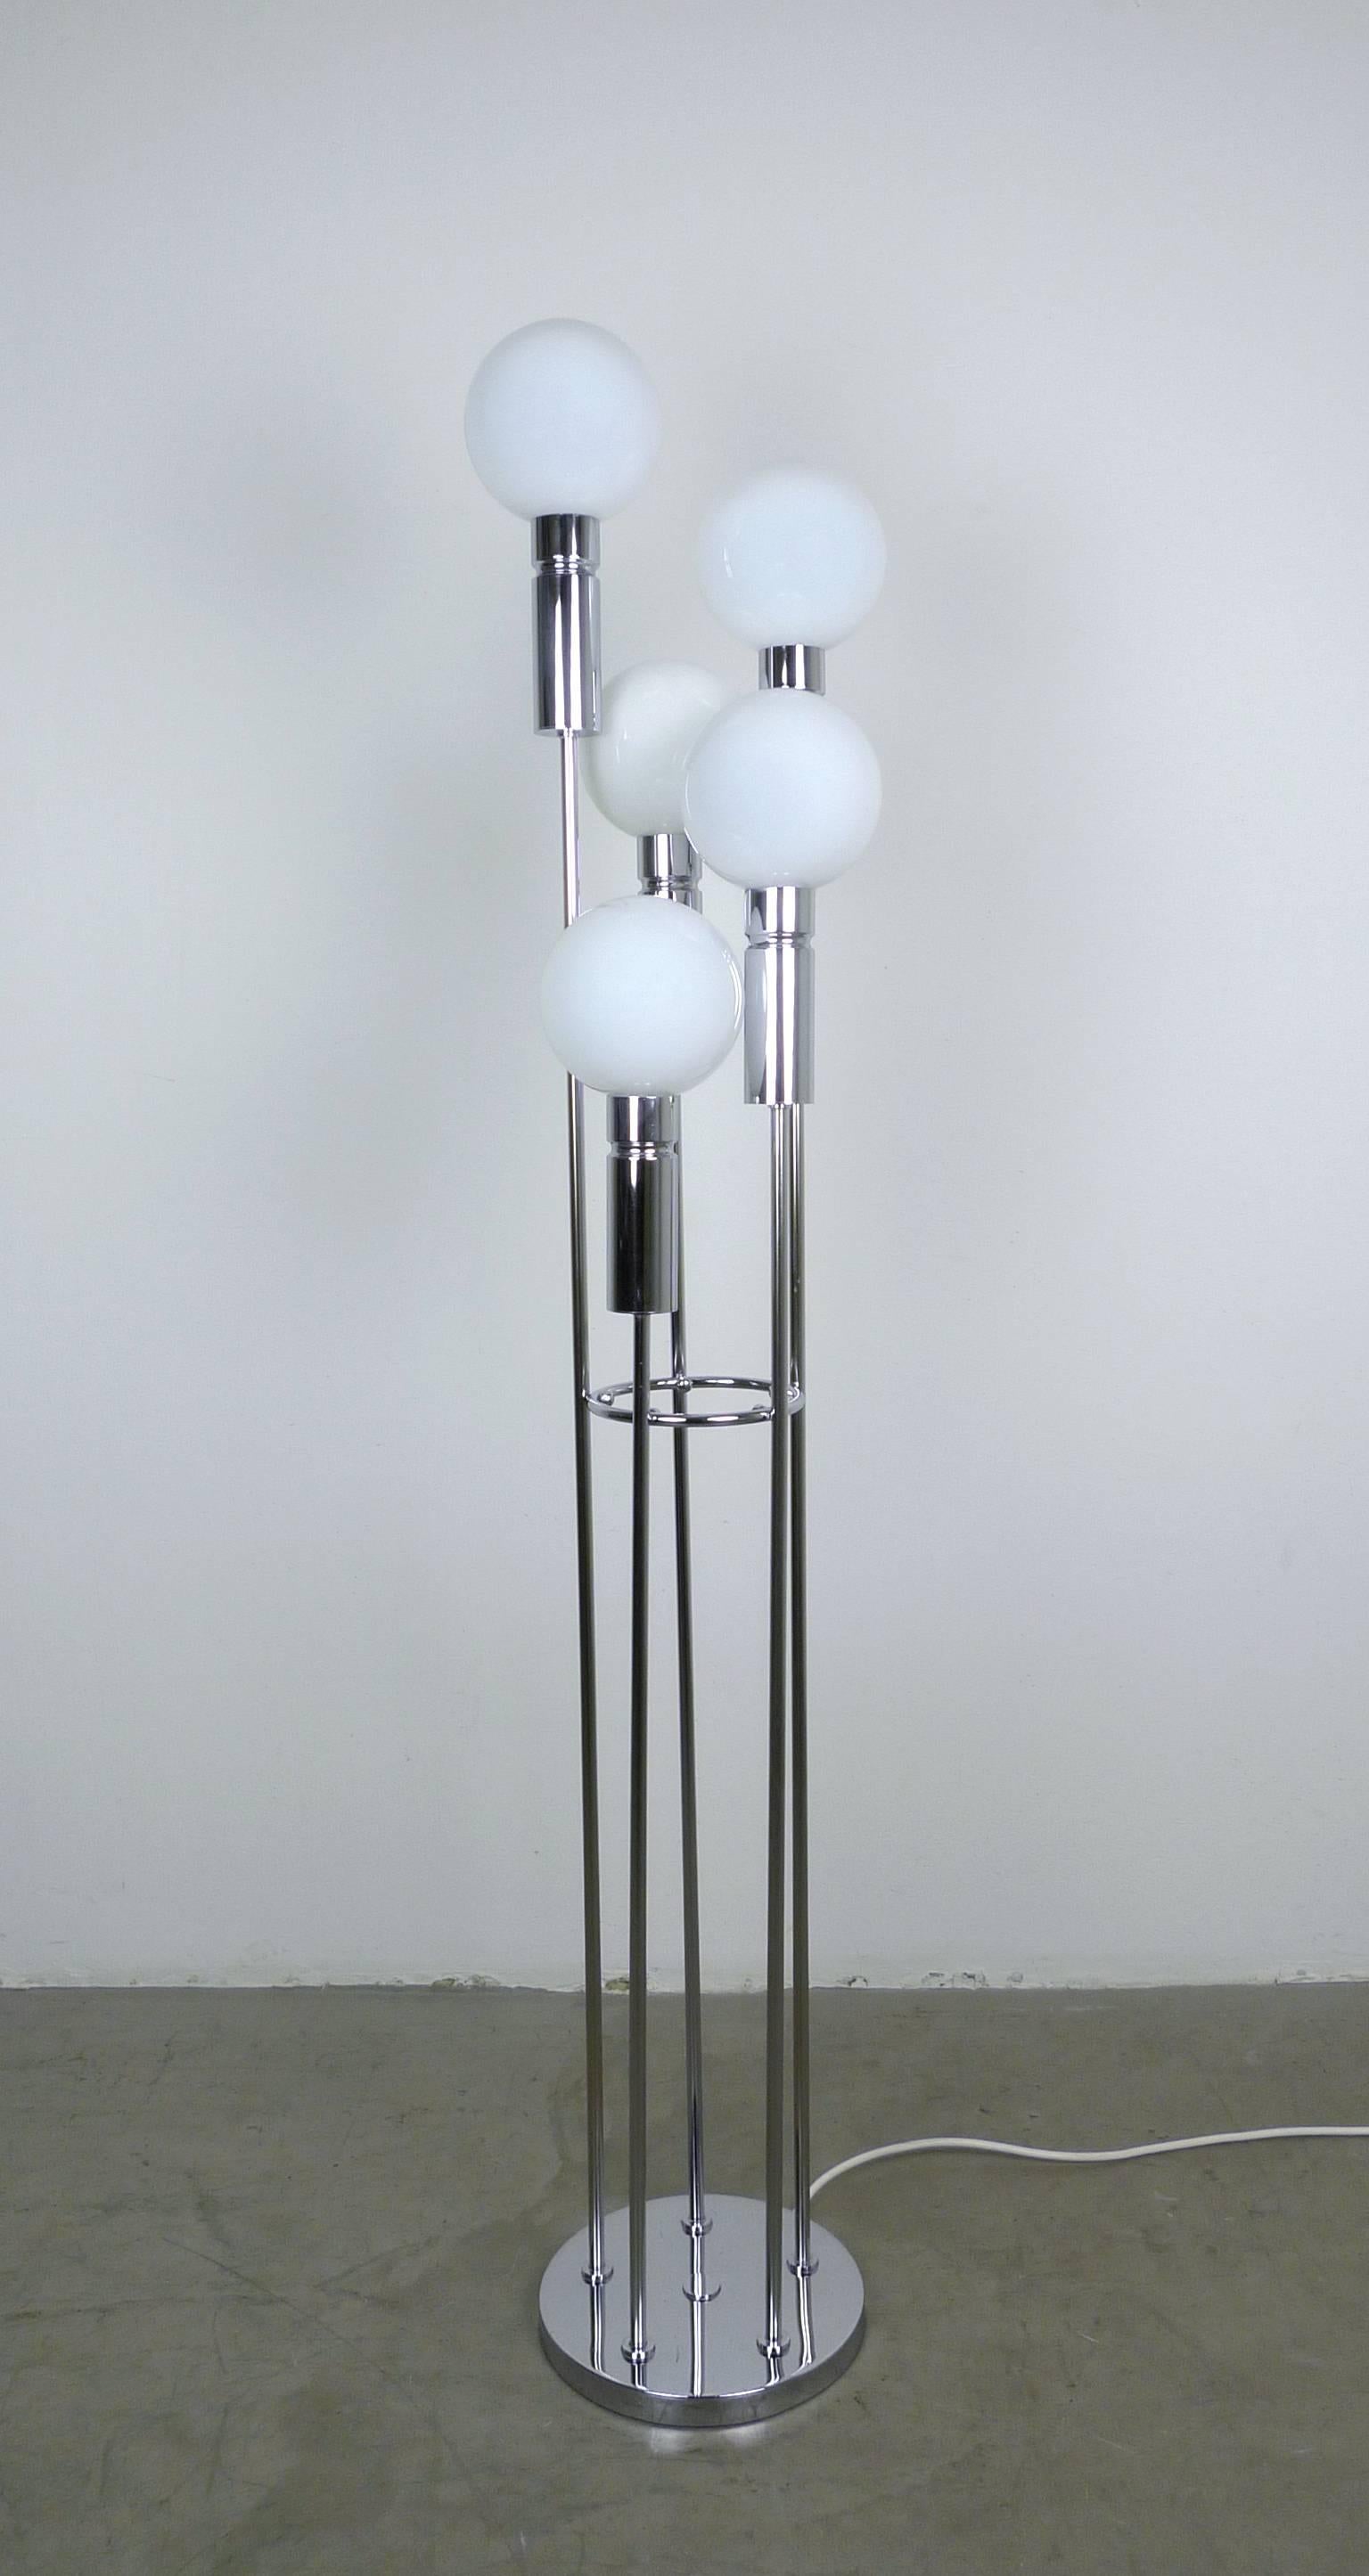 This floor lamp has a round base plate and chrome-plated metal rods, at the ends of which there are white glass spheres in different heights. Each glass ball is illuminated by an E 14 socket. The light intensity can be infinitely regulated by the